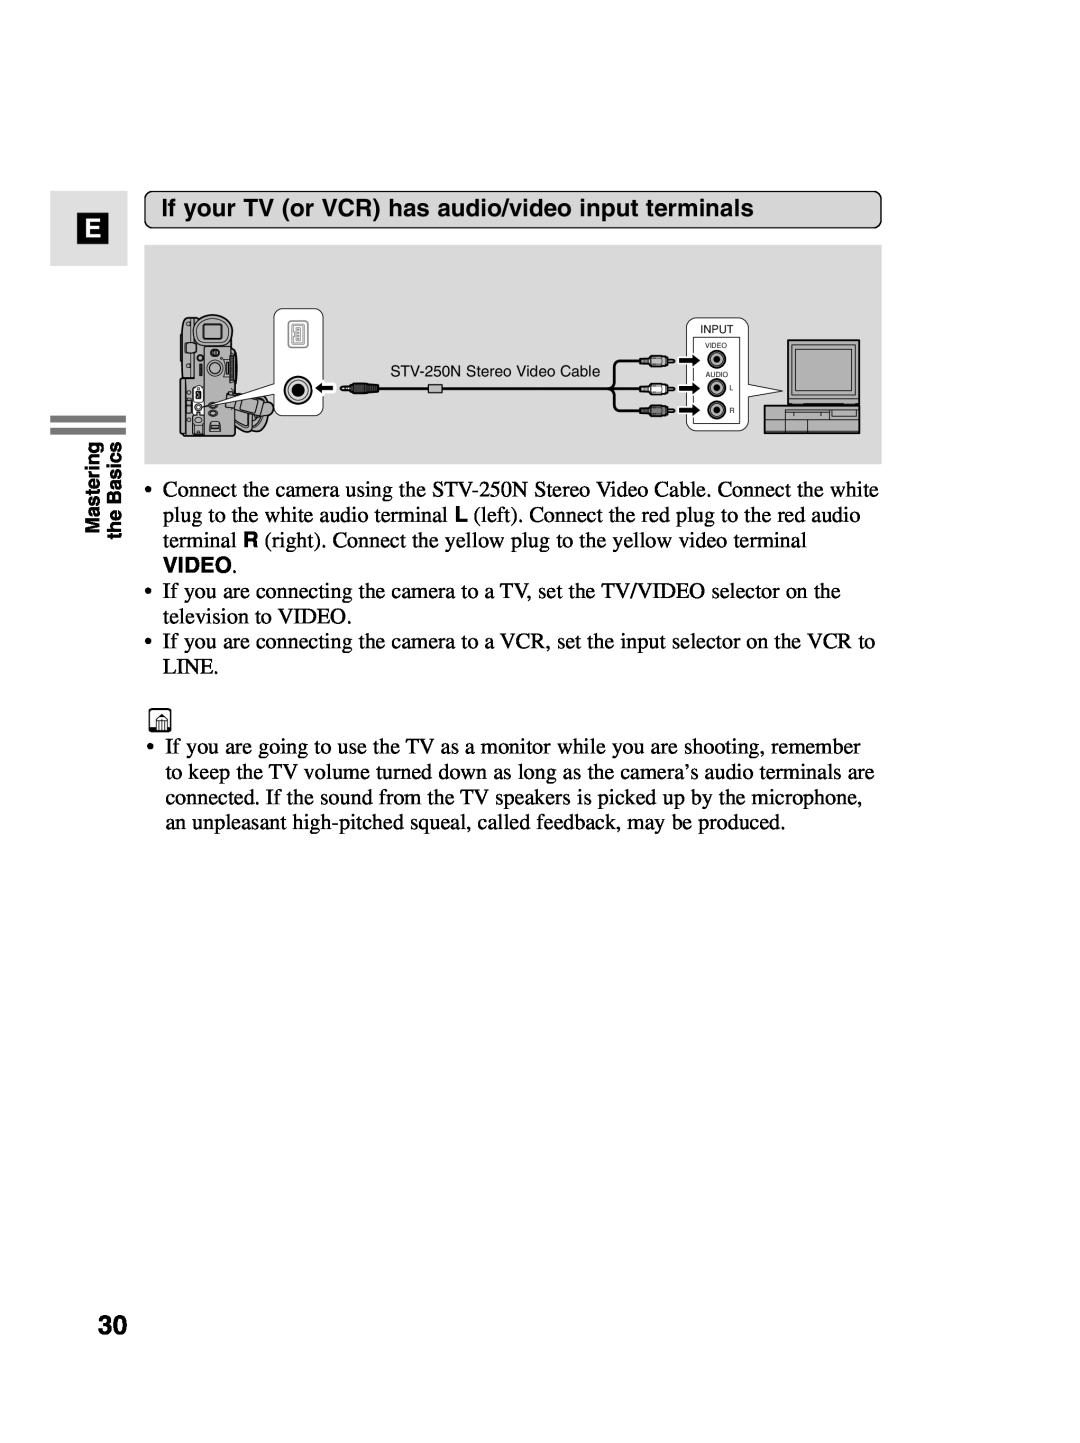 Canon MV4i MC instruction manual If your TV or VCR has audio/video input terminals, Video 